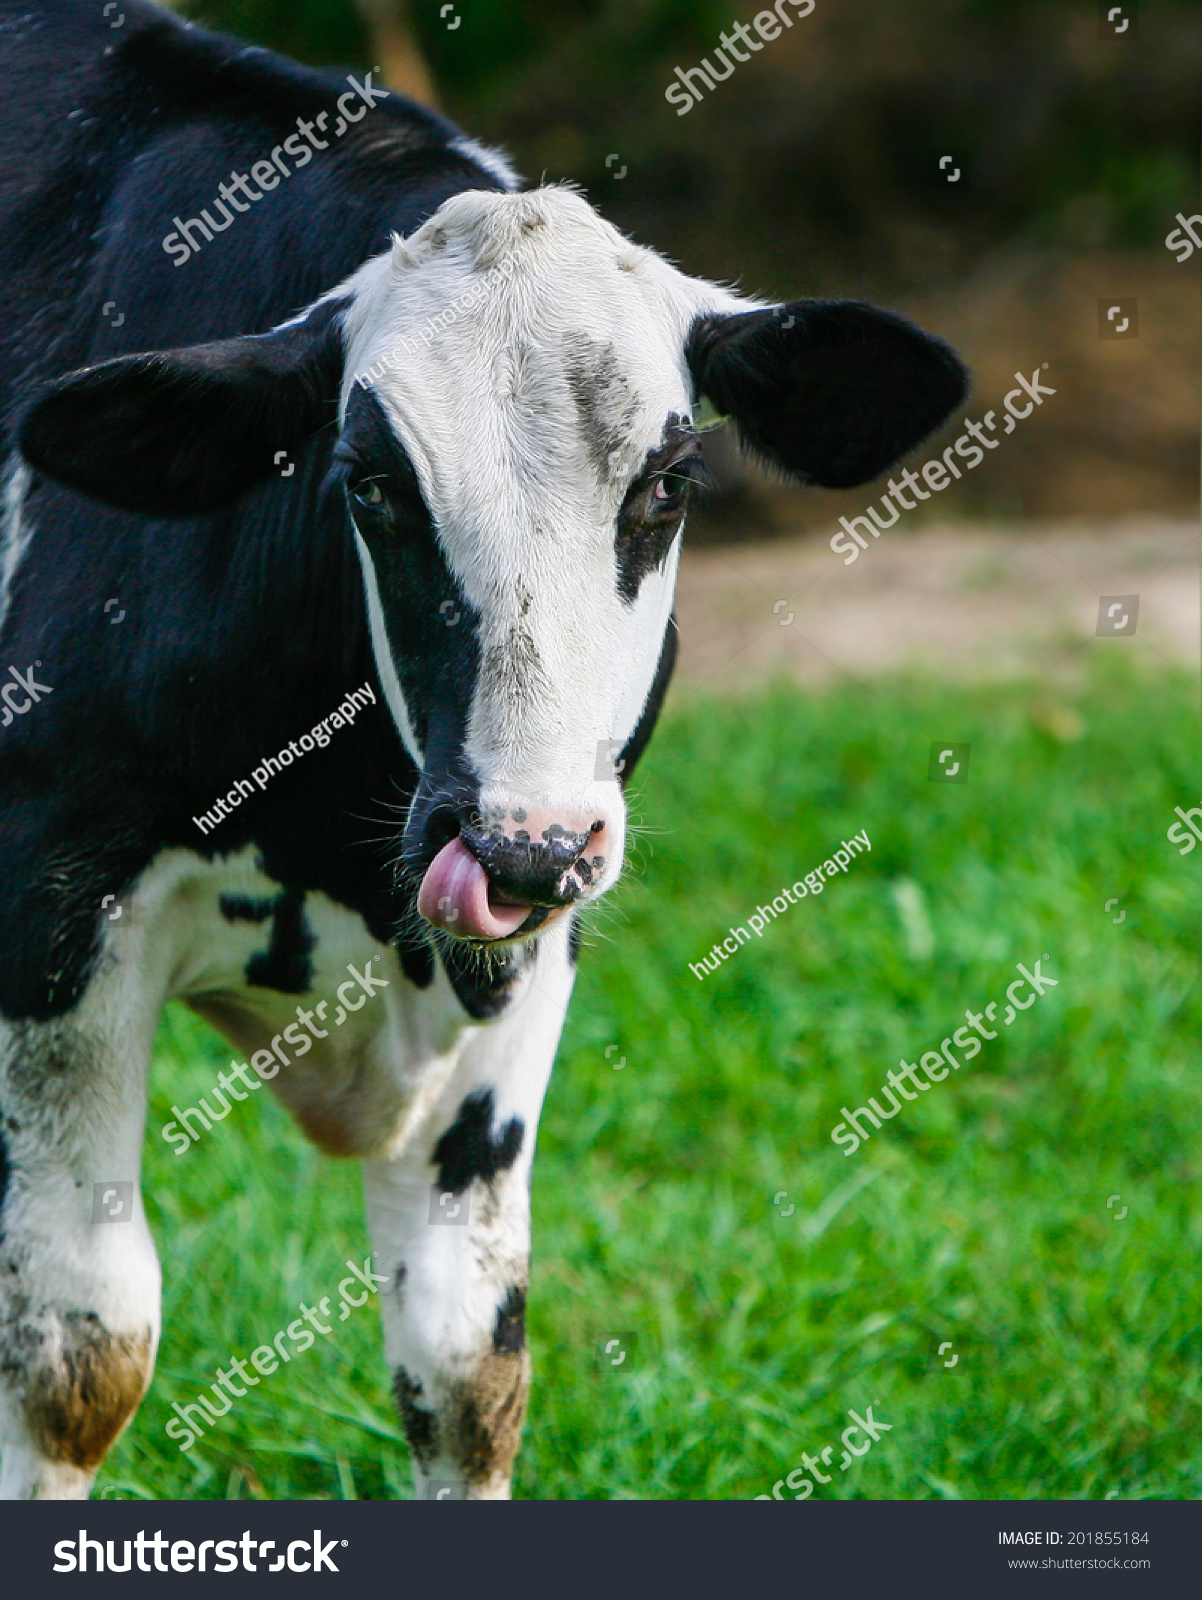 Black White Cow Sticking Out Tongue Stock Photo 201855184 - Shutterstock